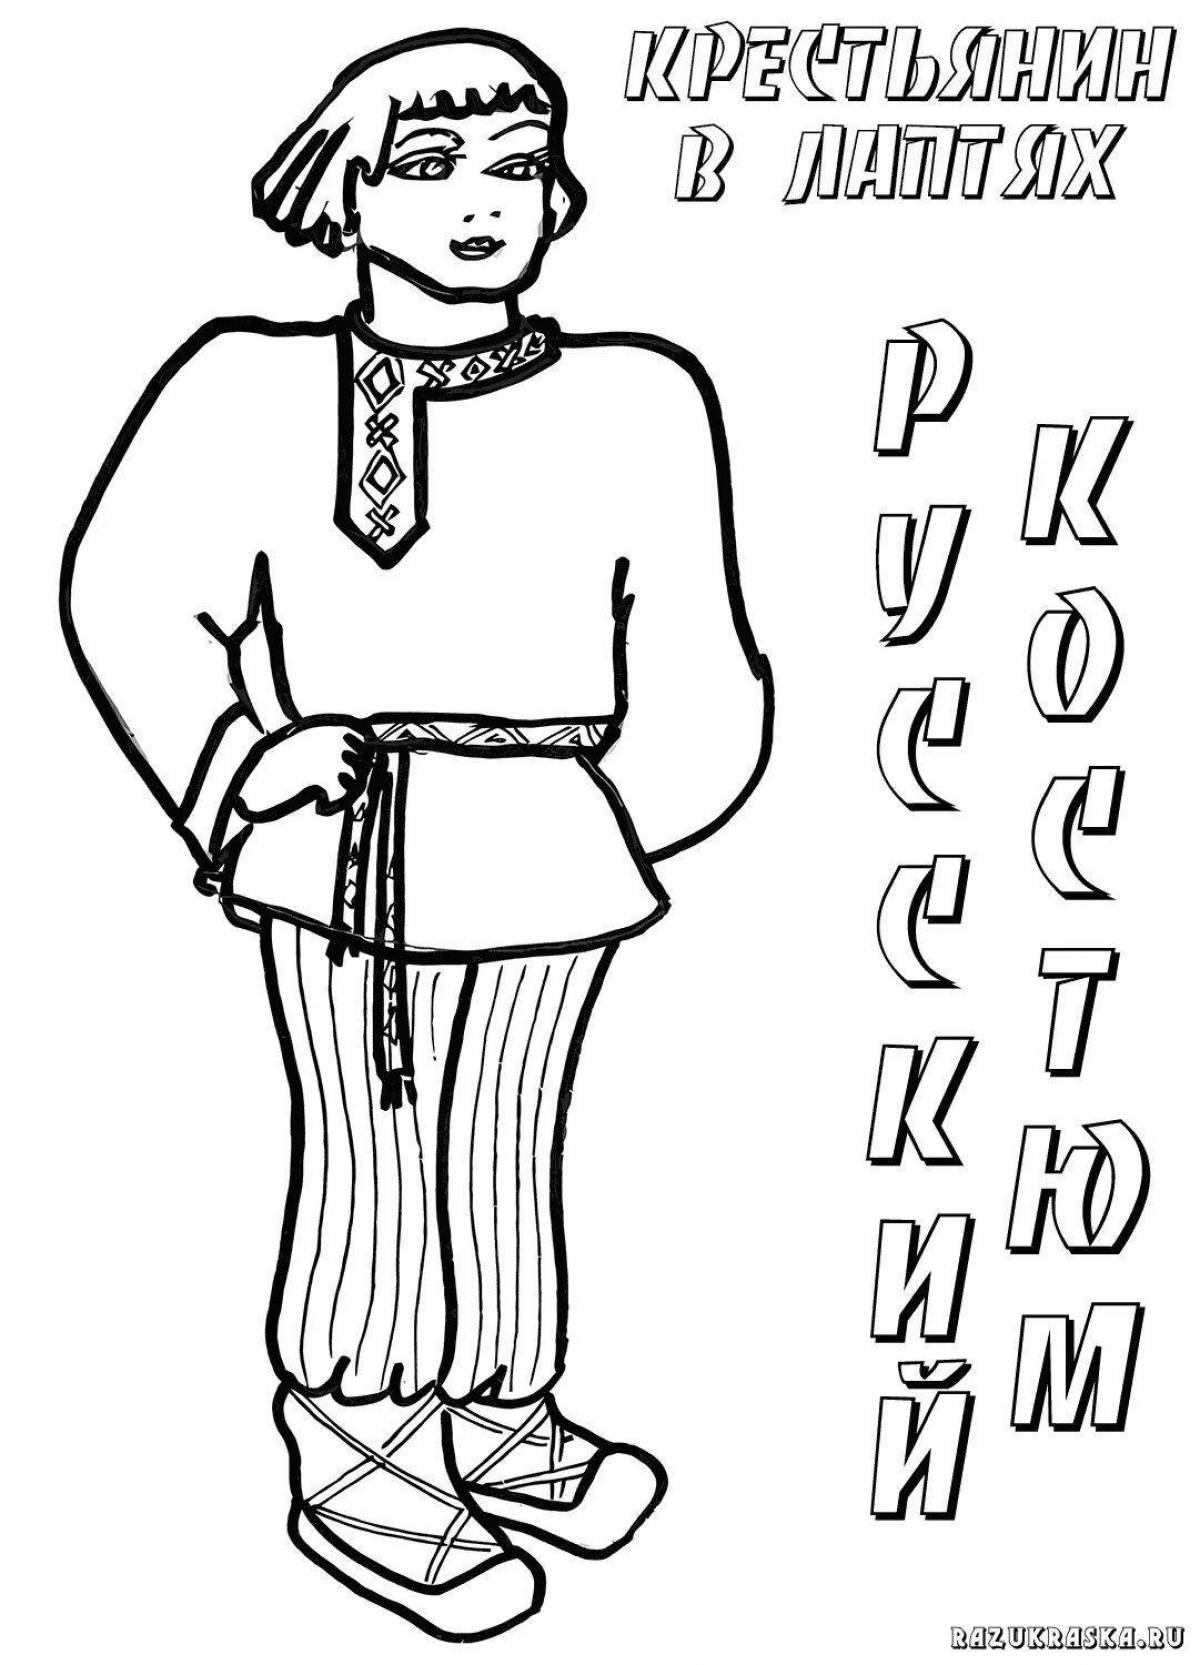 Coloring page festive Russian costume